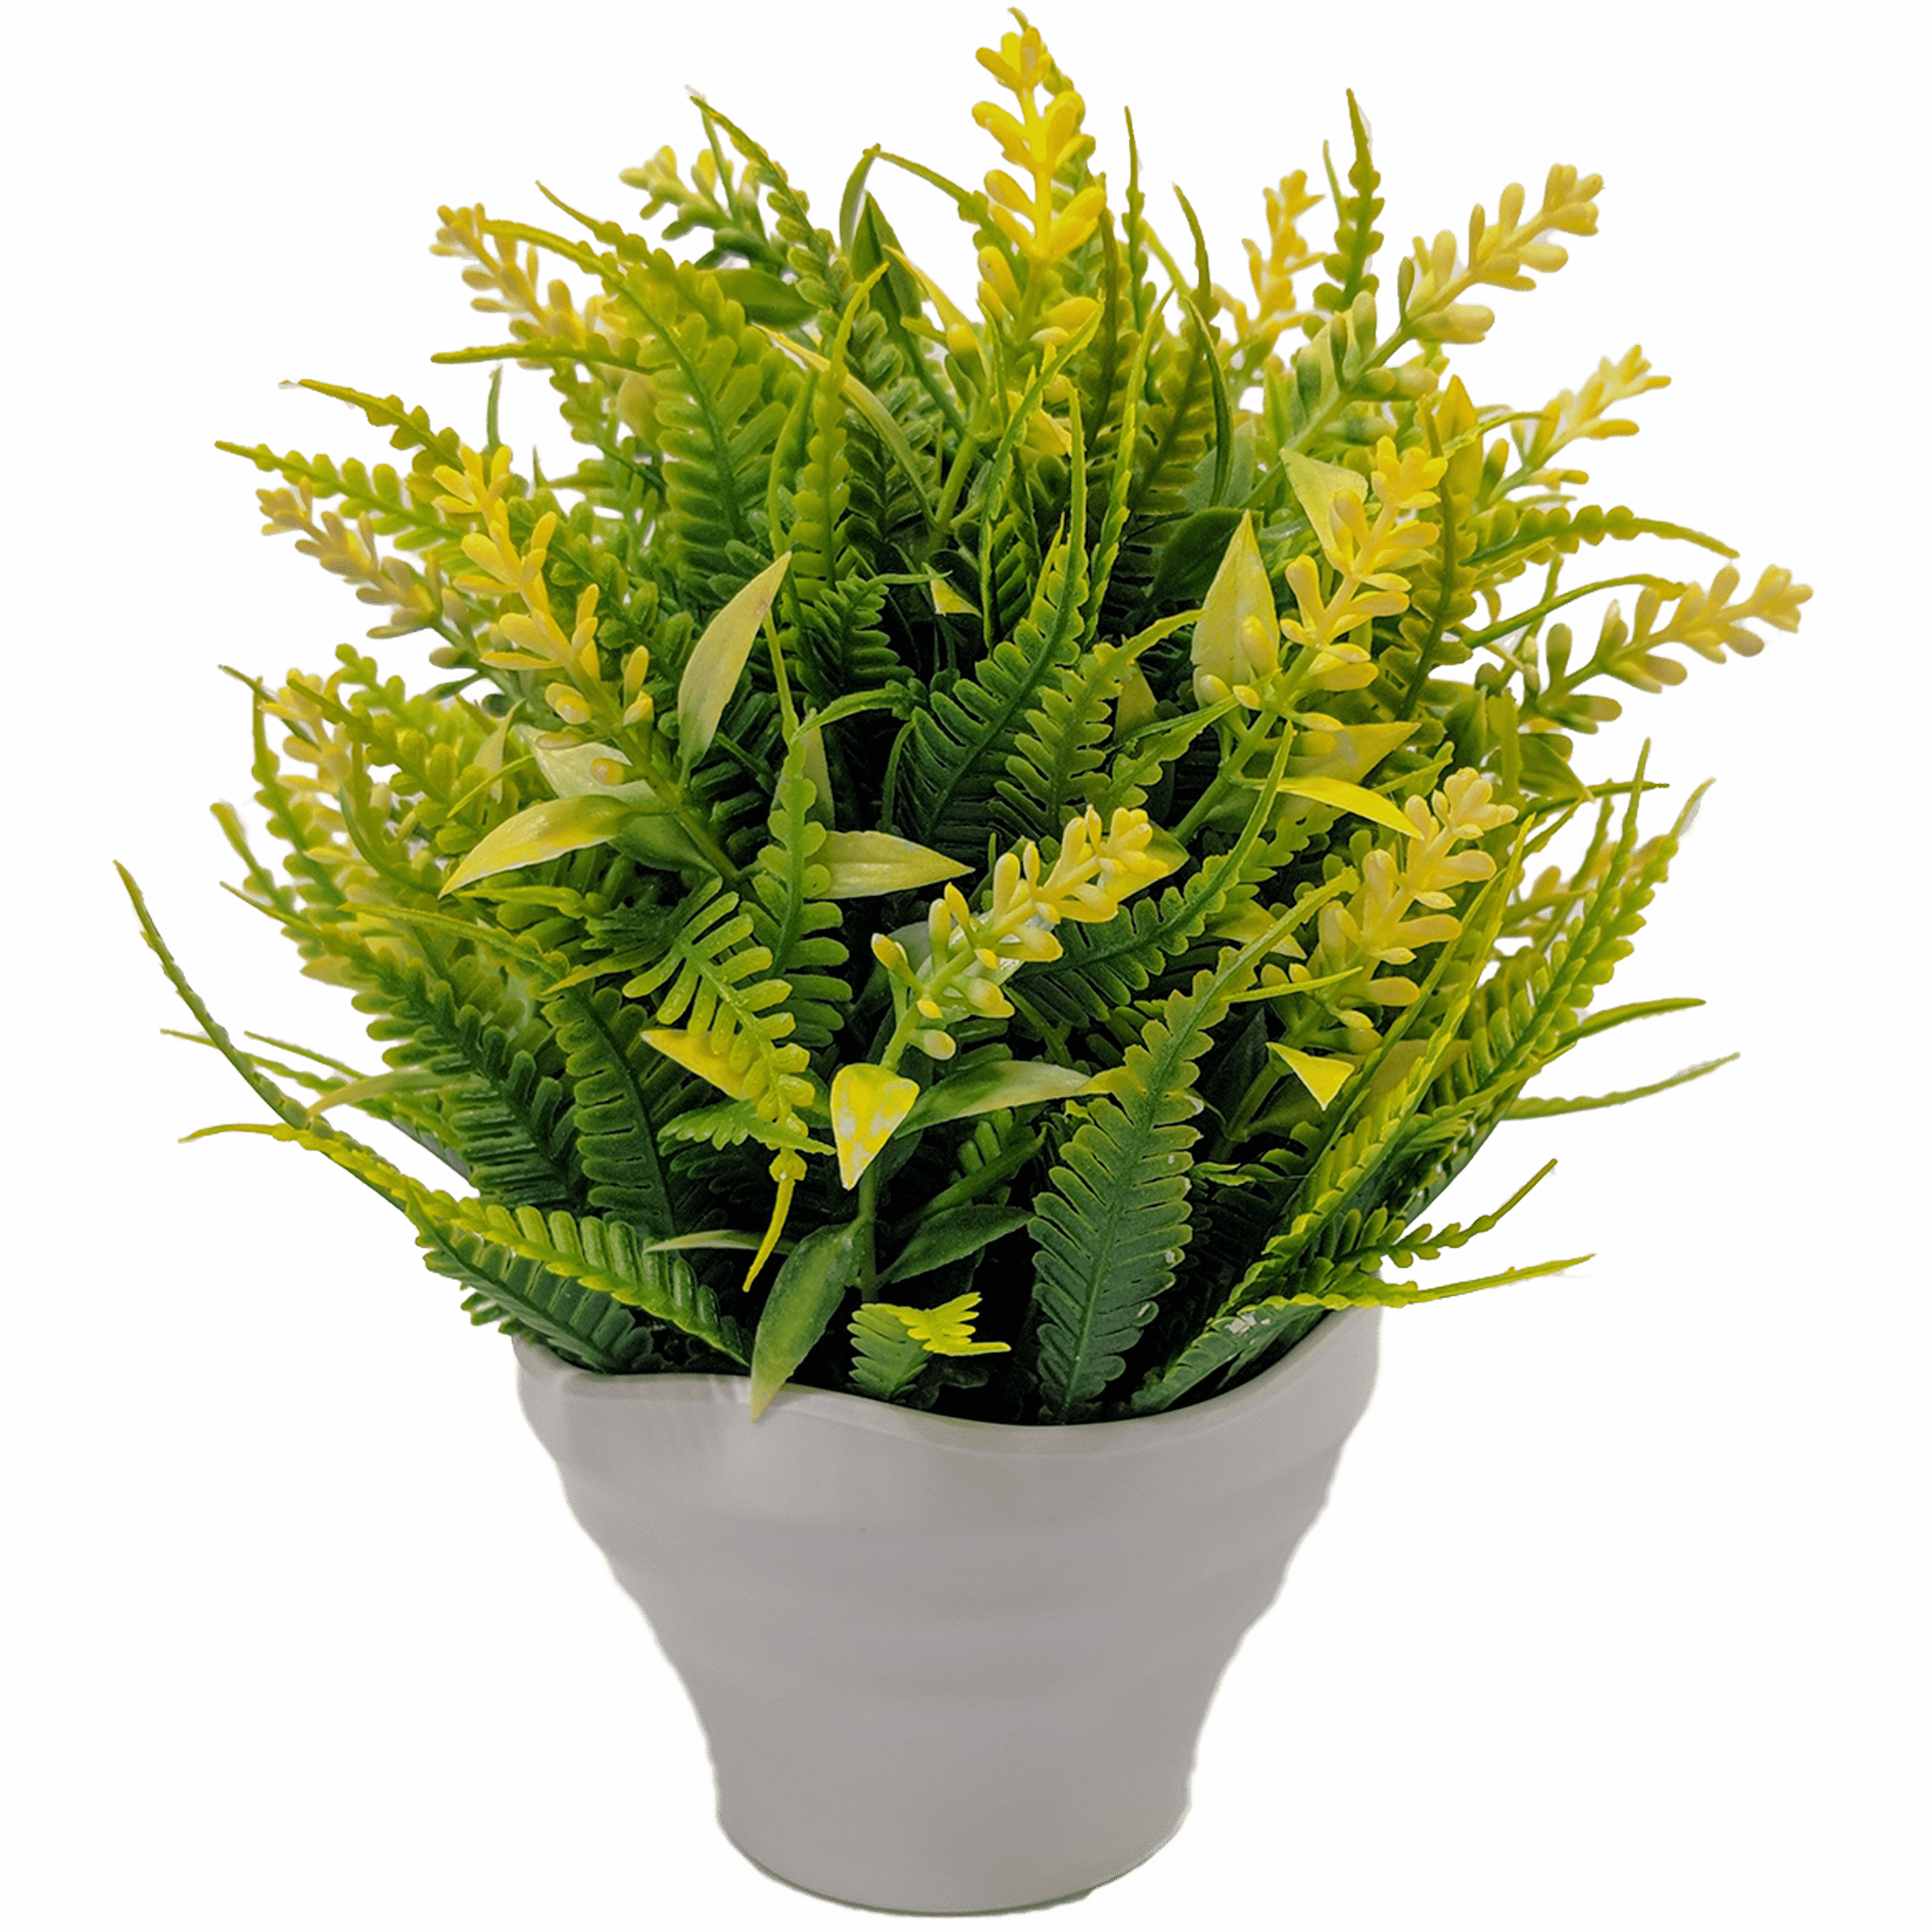 Artificial Potted Plant | 17cm | 6.7inch | Walmart Canada